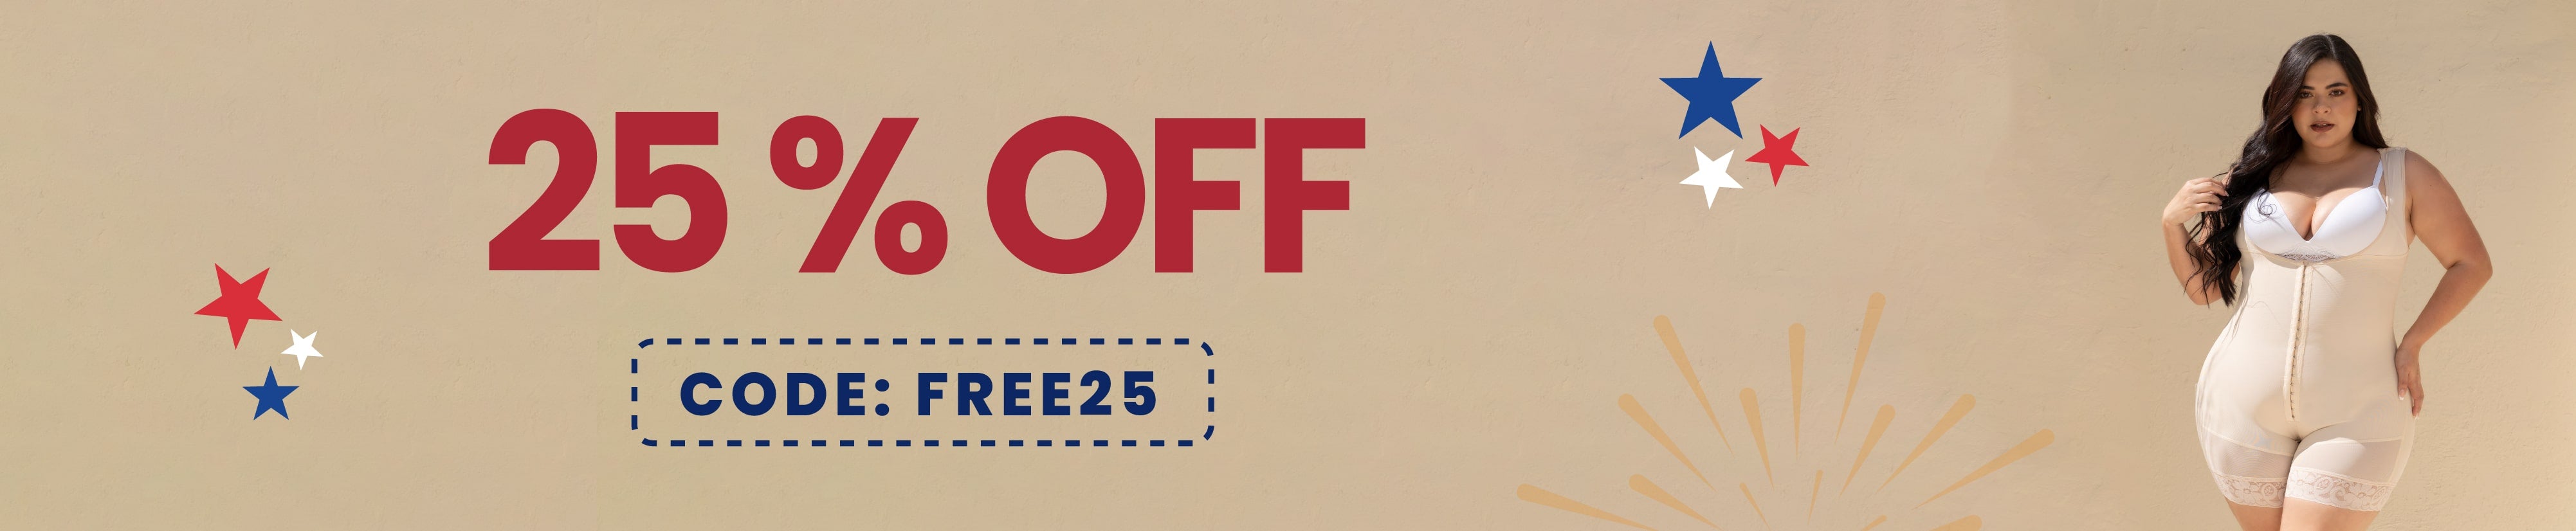 INDEPENDENCE SALE! 25% OFF - CODE: FREE25